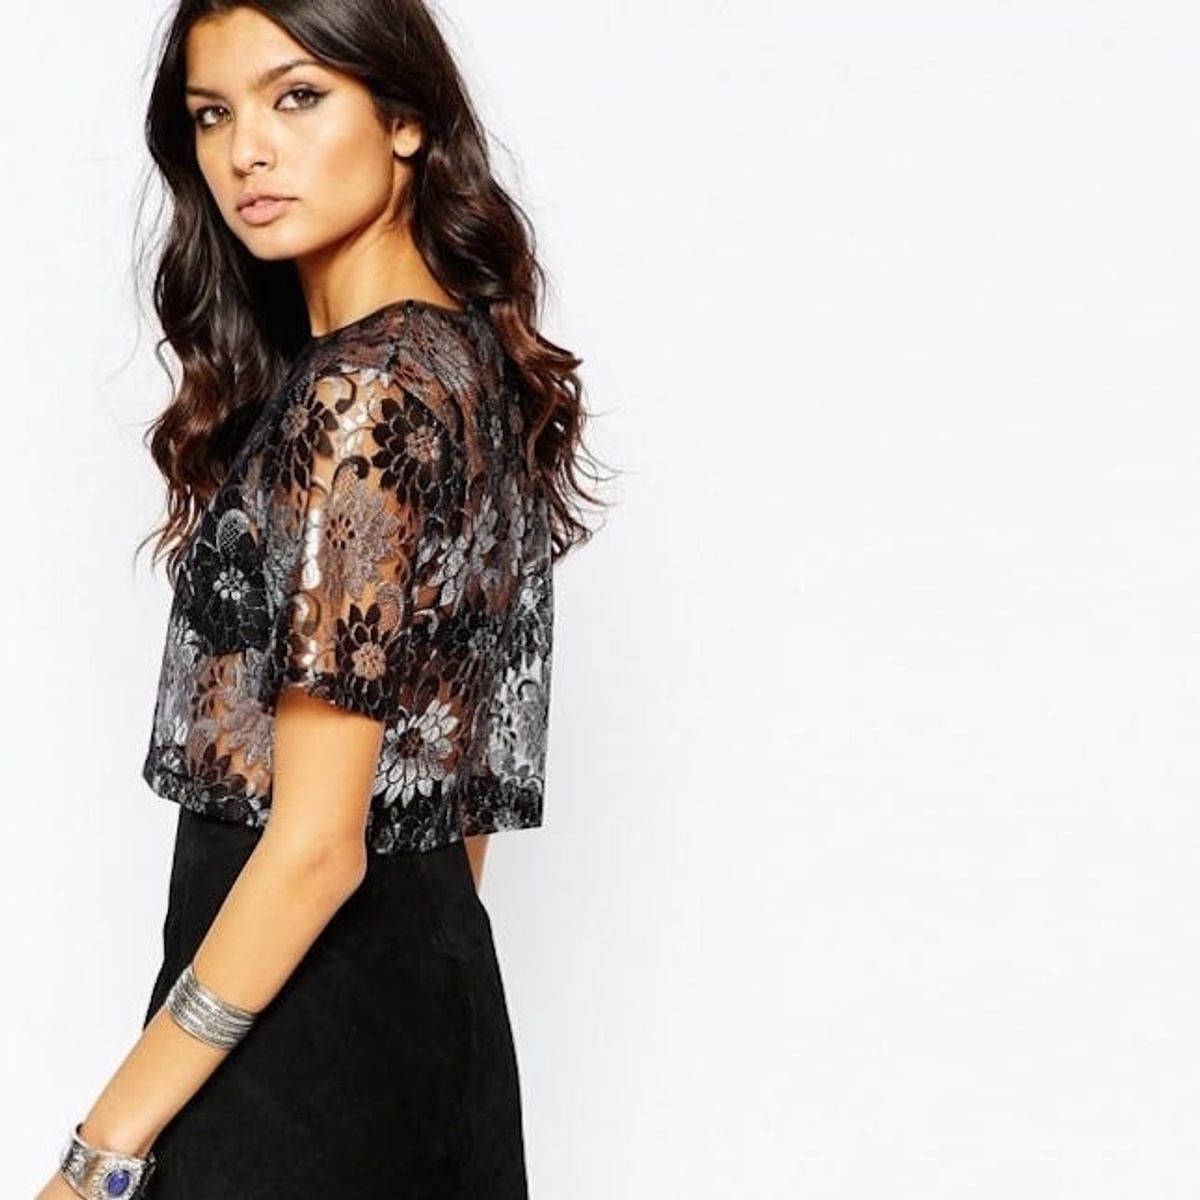 9 Rules About Wearing Lace That You Should Totally Break